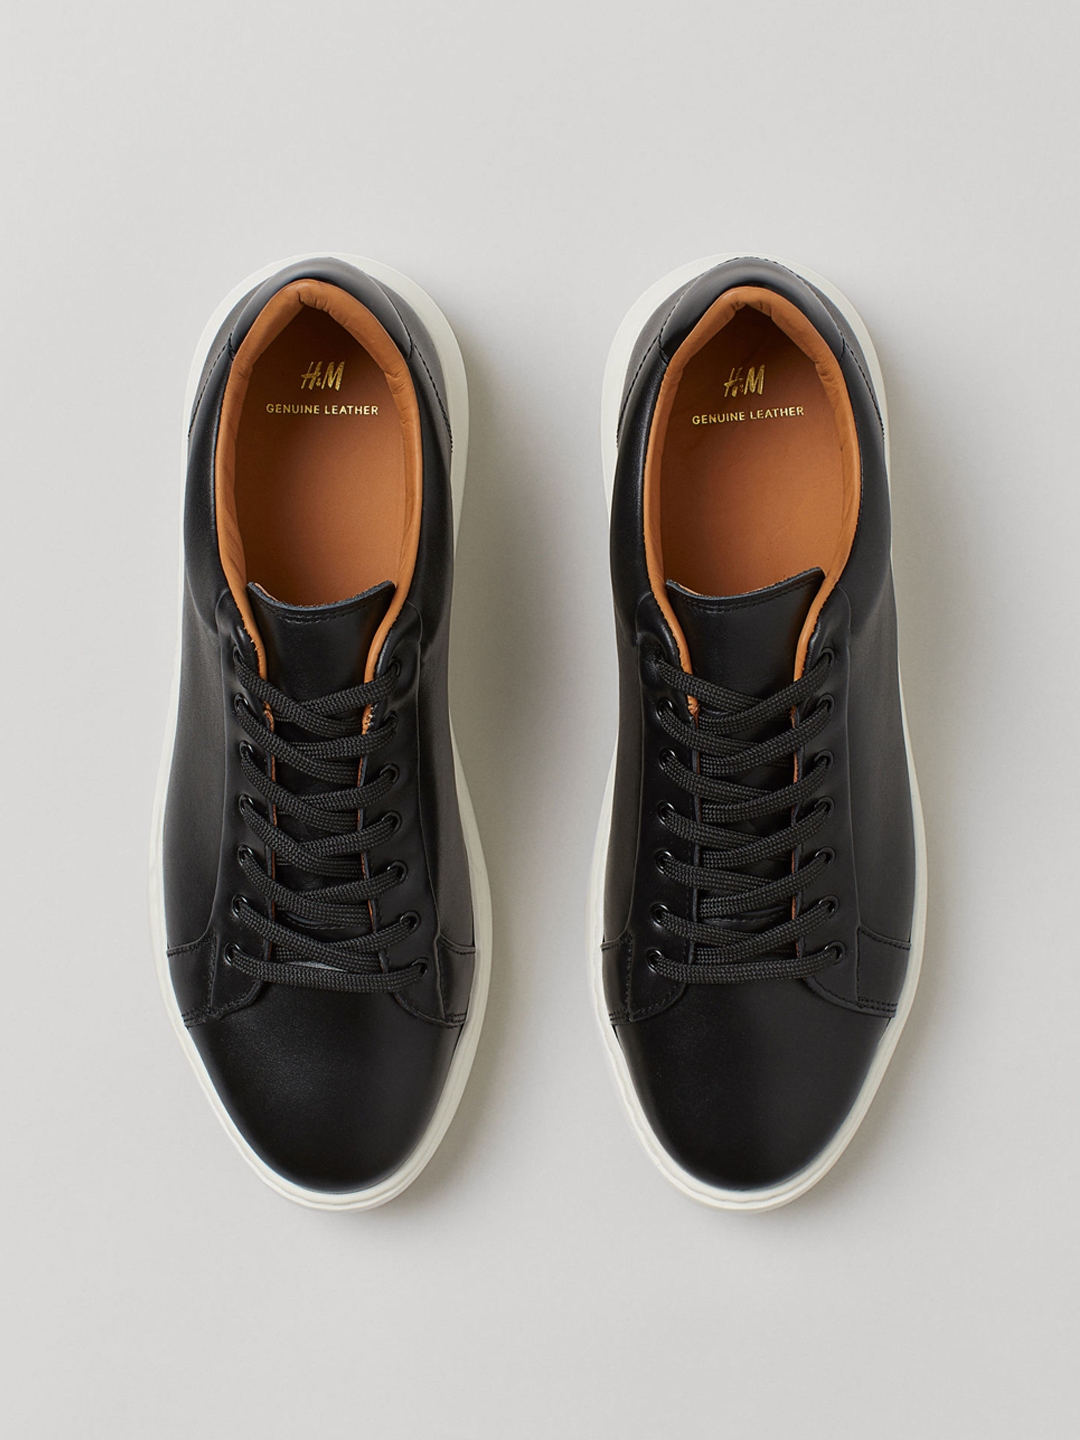 Buy H&M Men Black Leather Trainers - Casual Shoes for Men 14503066 | Myntra